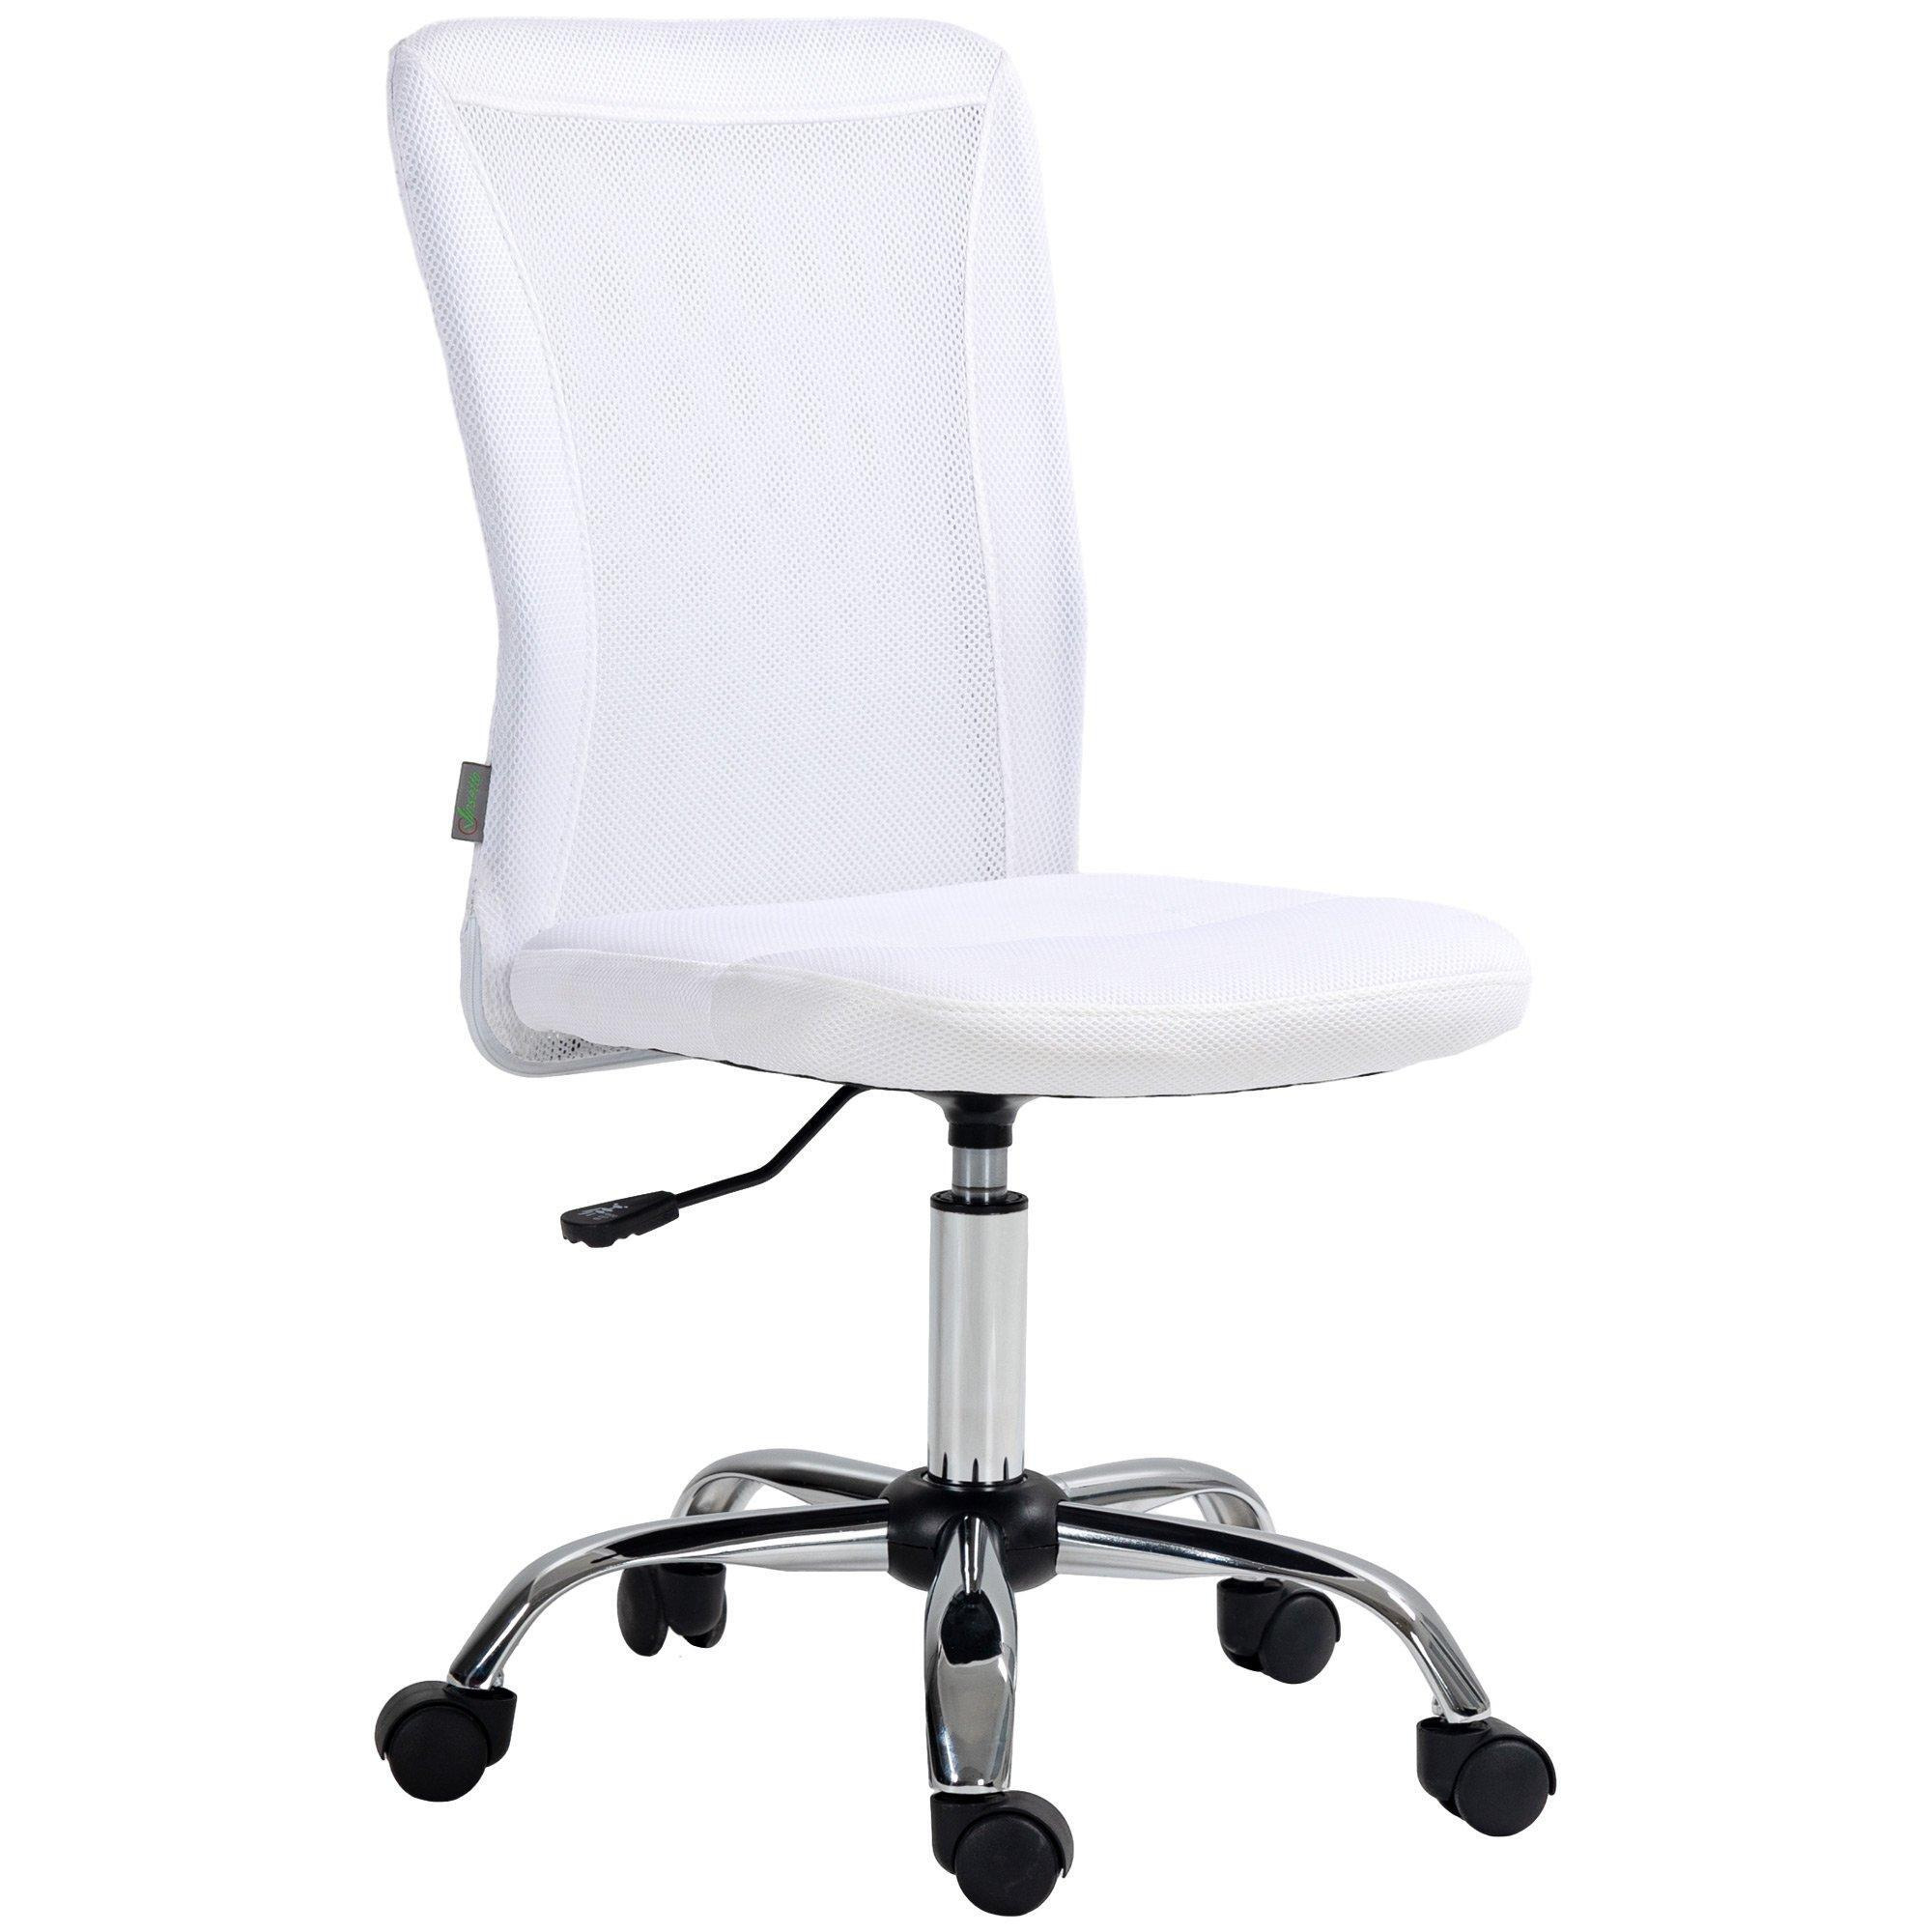 Armless Desk Chair Height Adjustable Mesh Office Chair with 5 Wheels - image 1